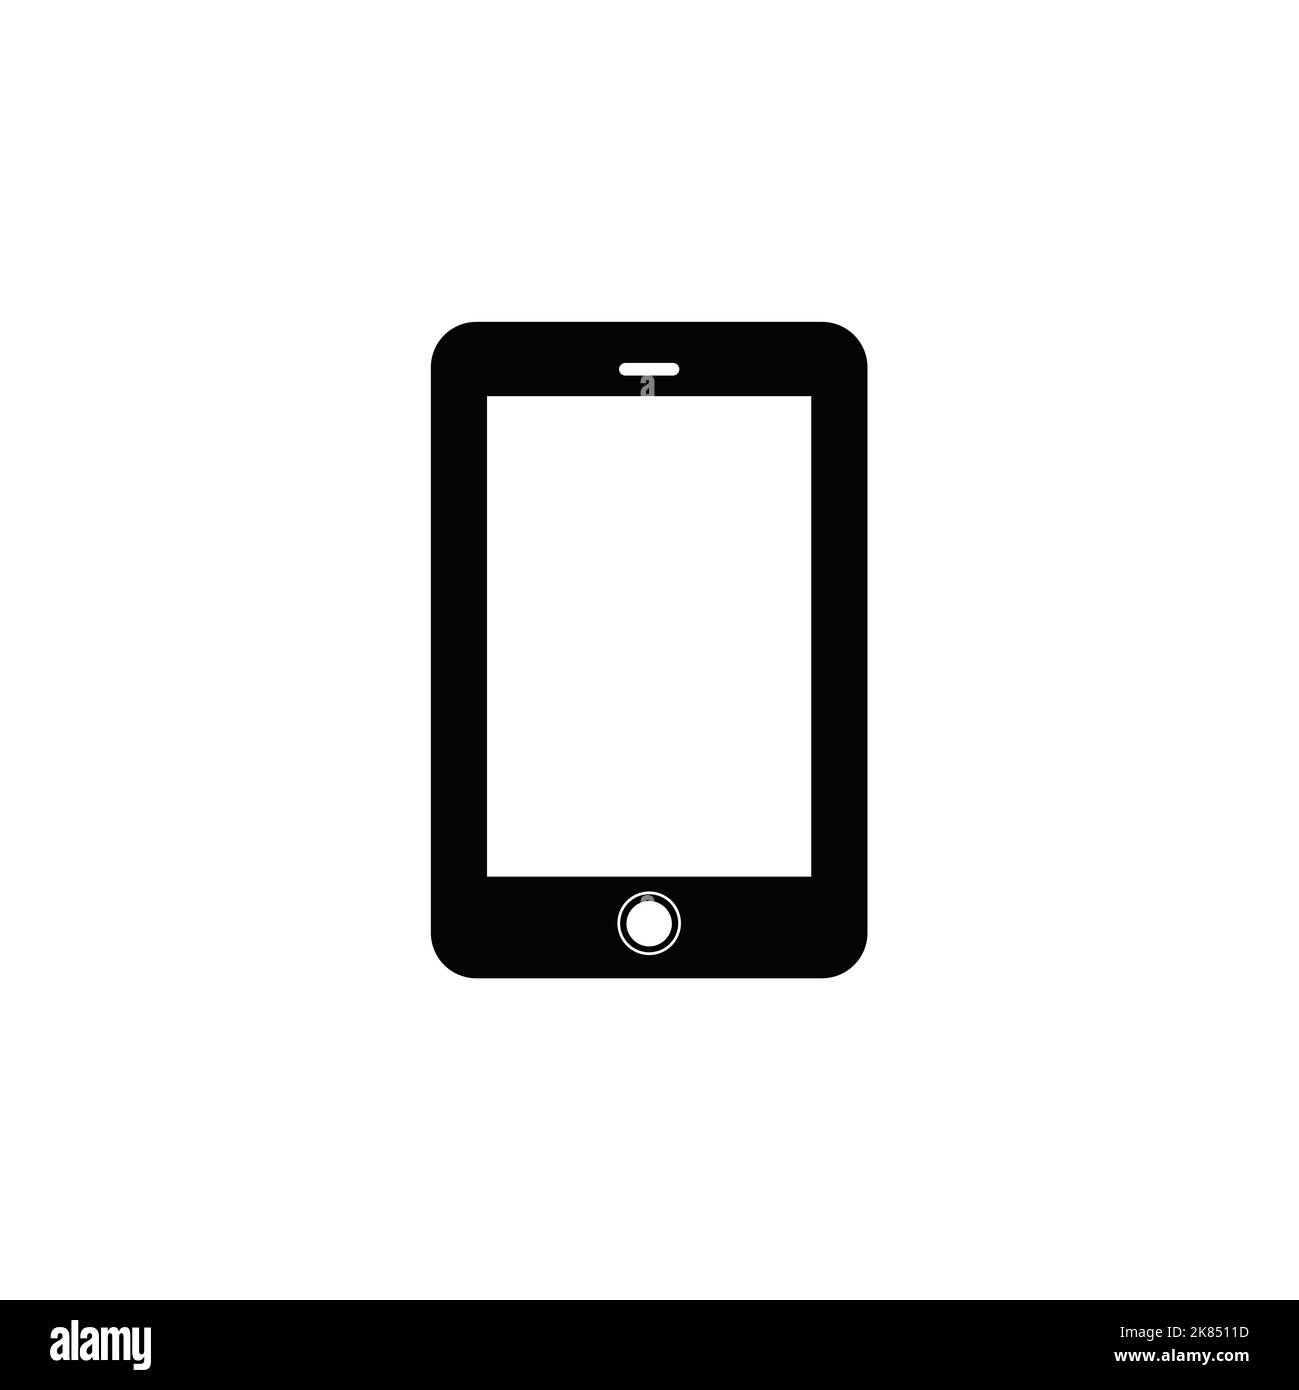 Smart phone icon, logo front side vector illustration on white isolated background. Stock Vector